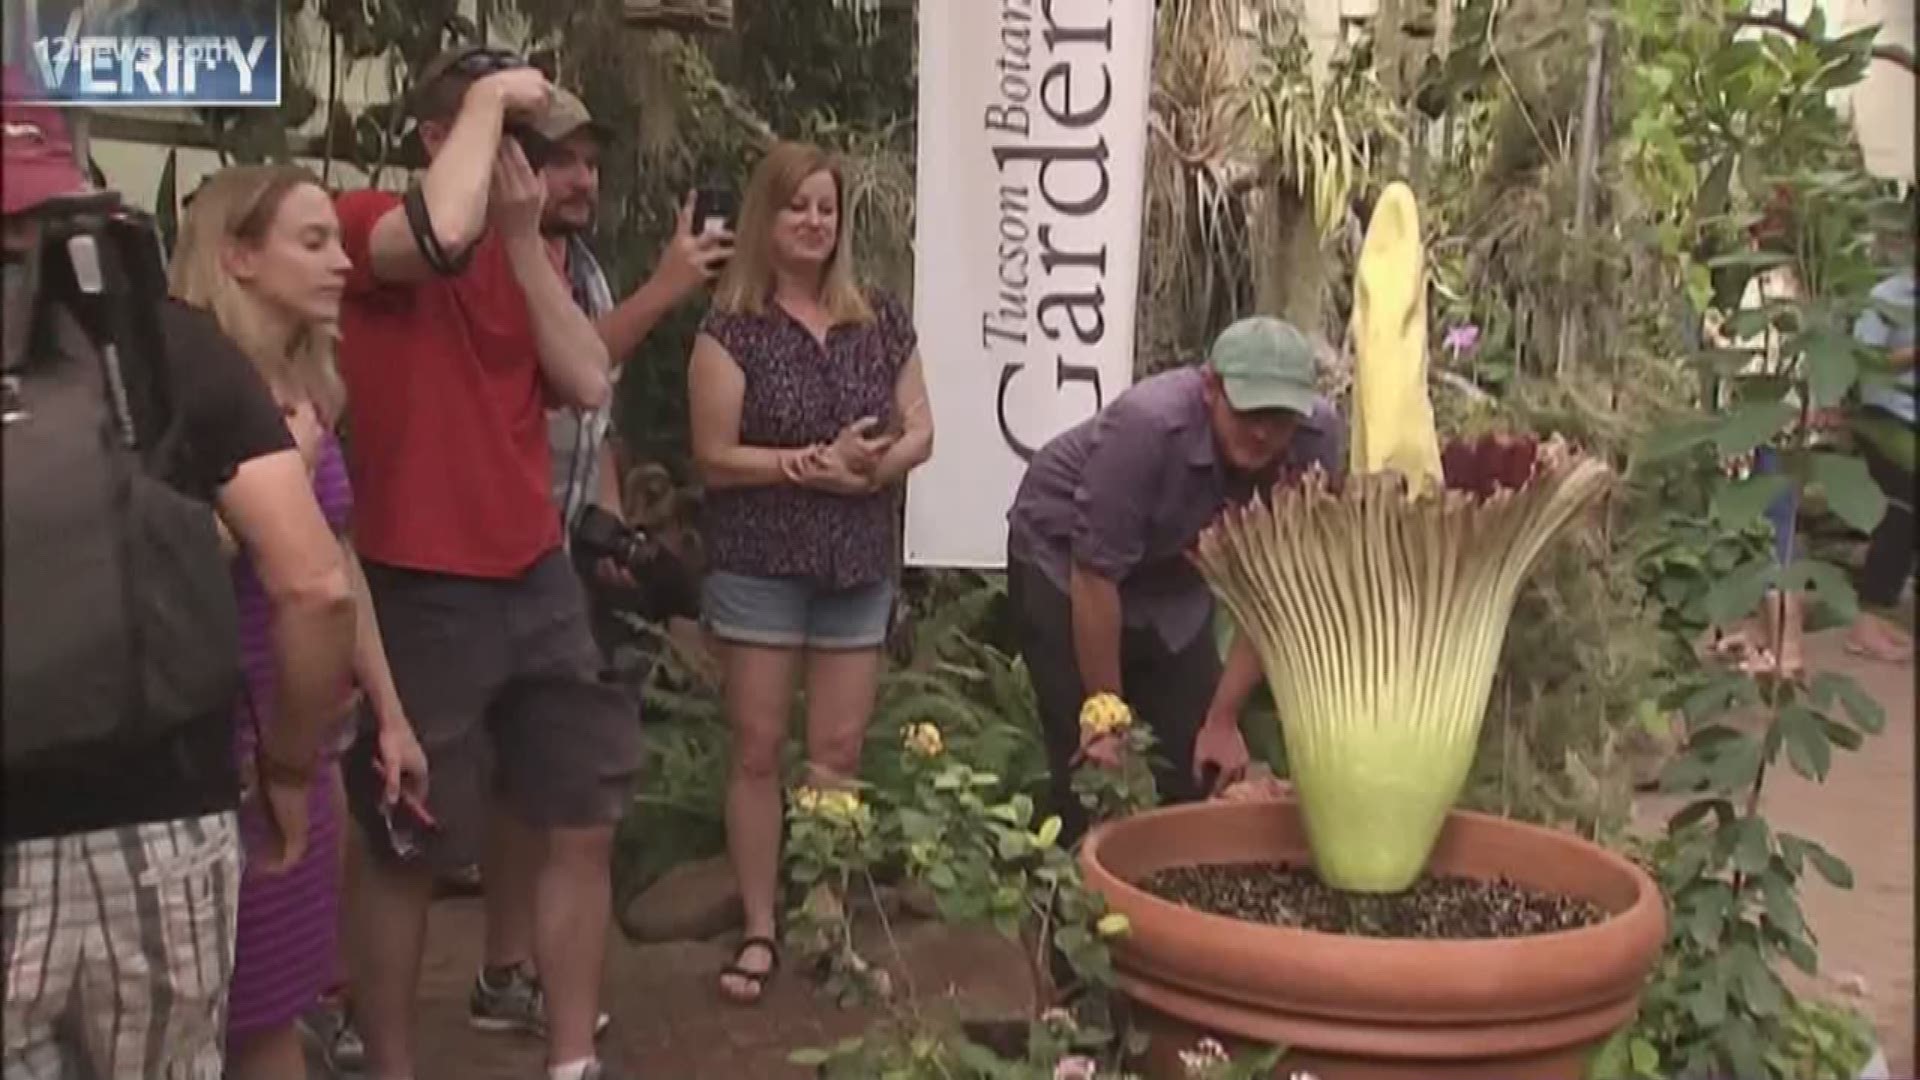 It's called the corpse flower for a reason. But is that reason accurate?